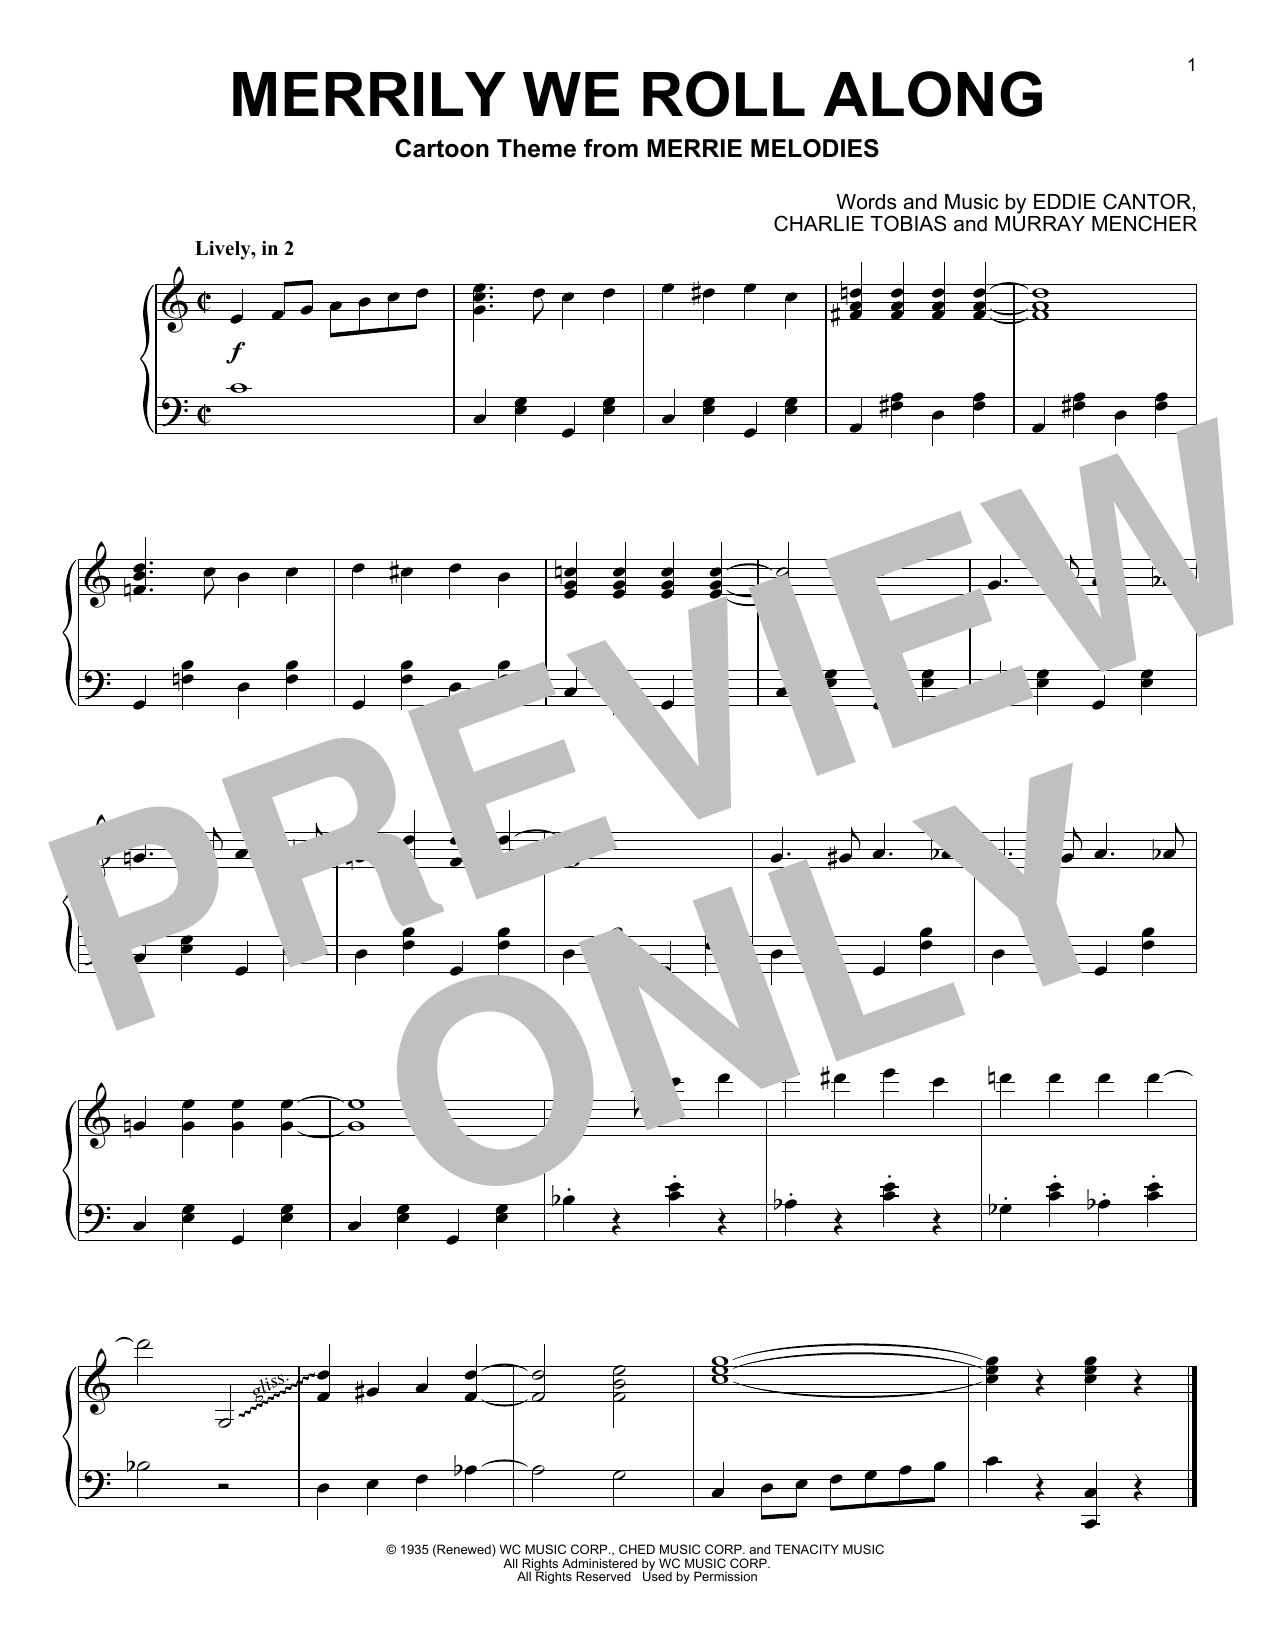 Download Charles Tobias, Eddie Cantor & Murra Merrily We Roll Along (from Looney Tune Sheet Music